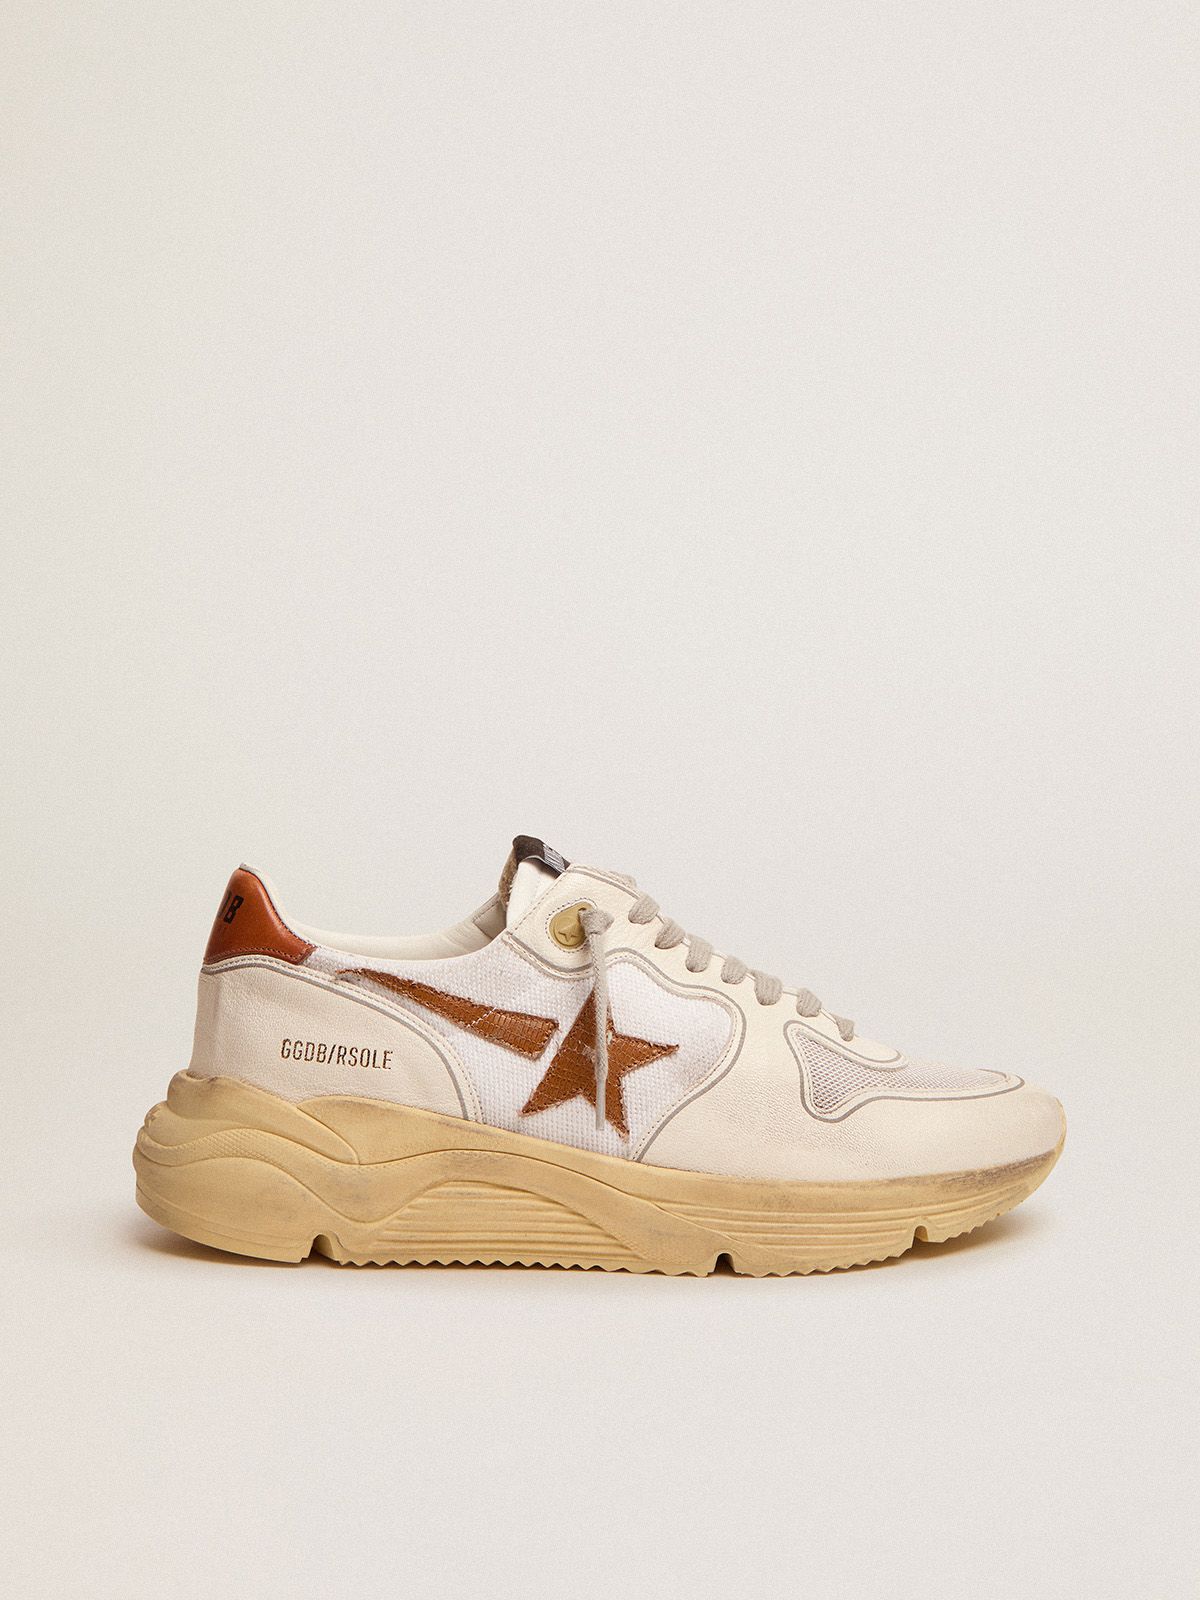 Running Sole LTD sneakers with lizard-print brown leather star and tan leather heel tab